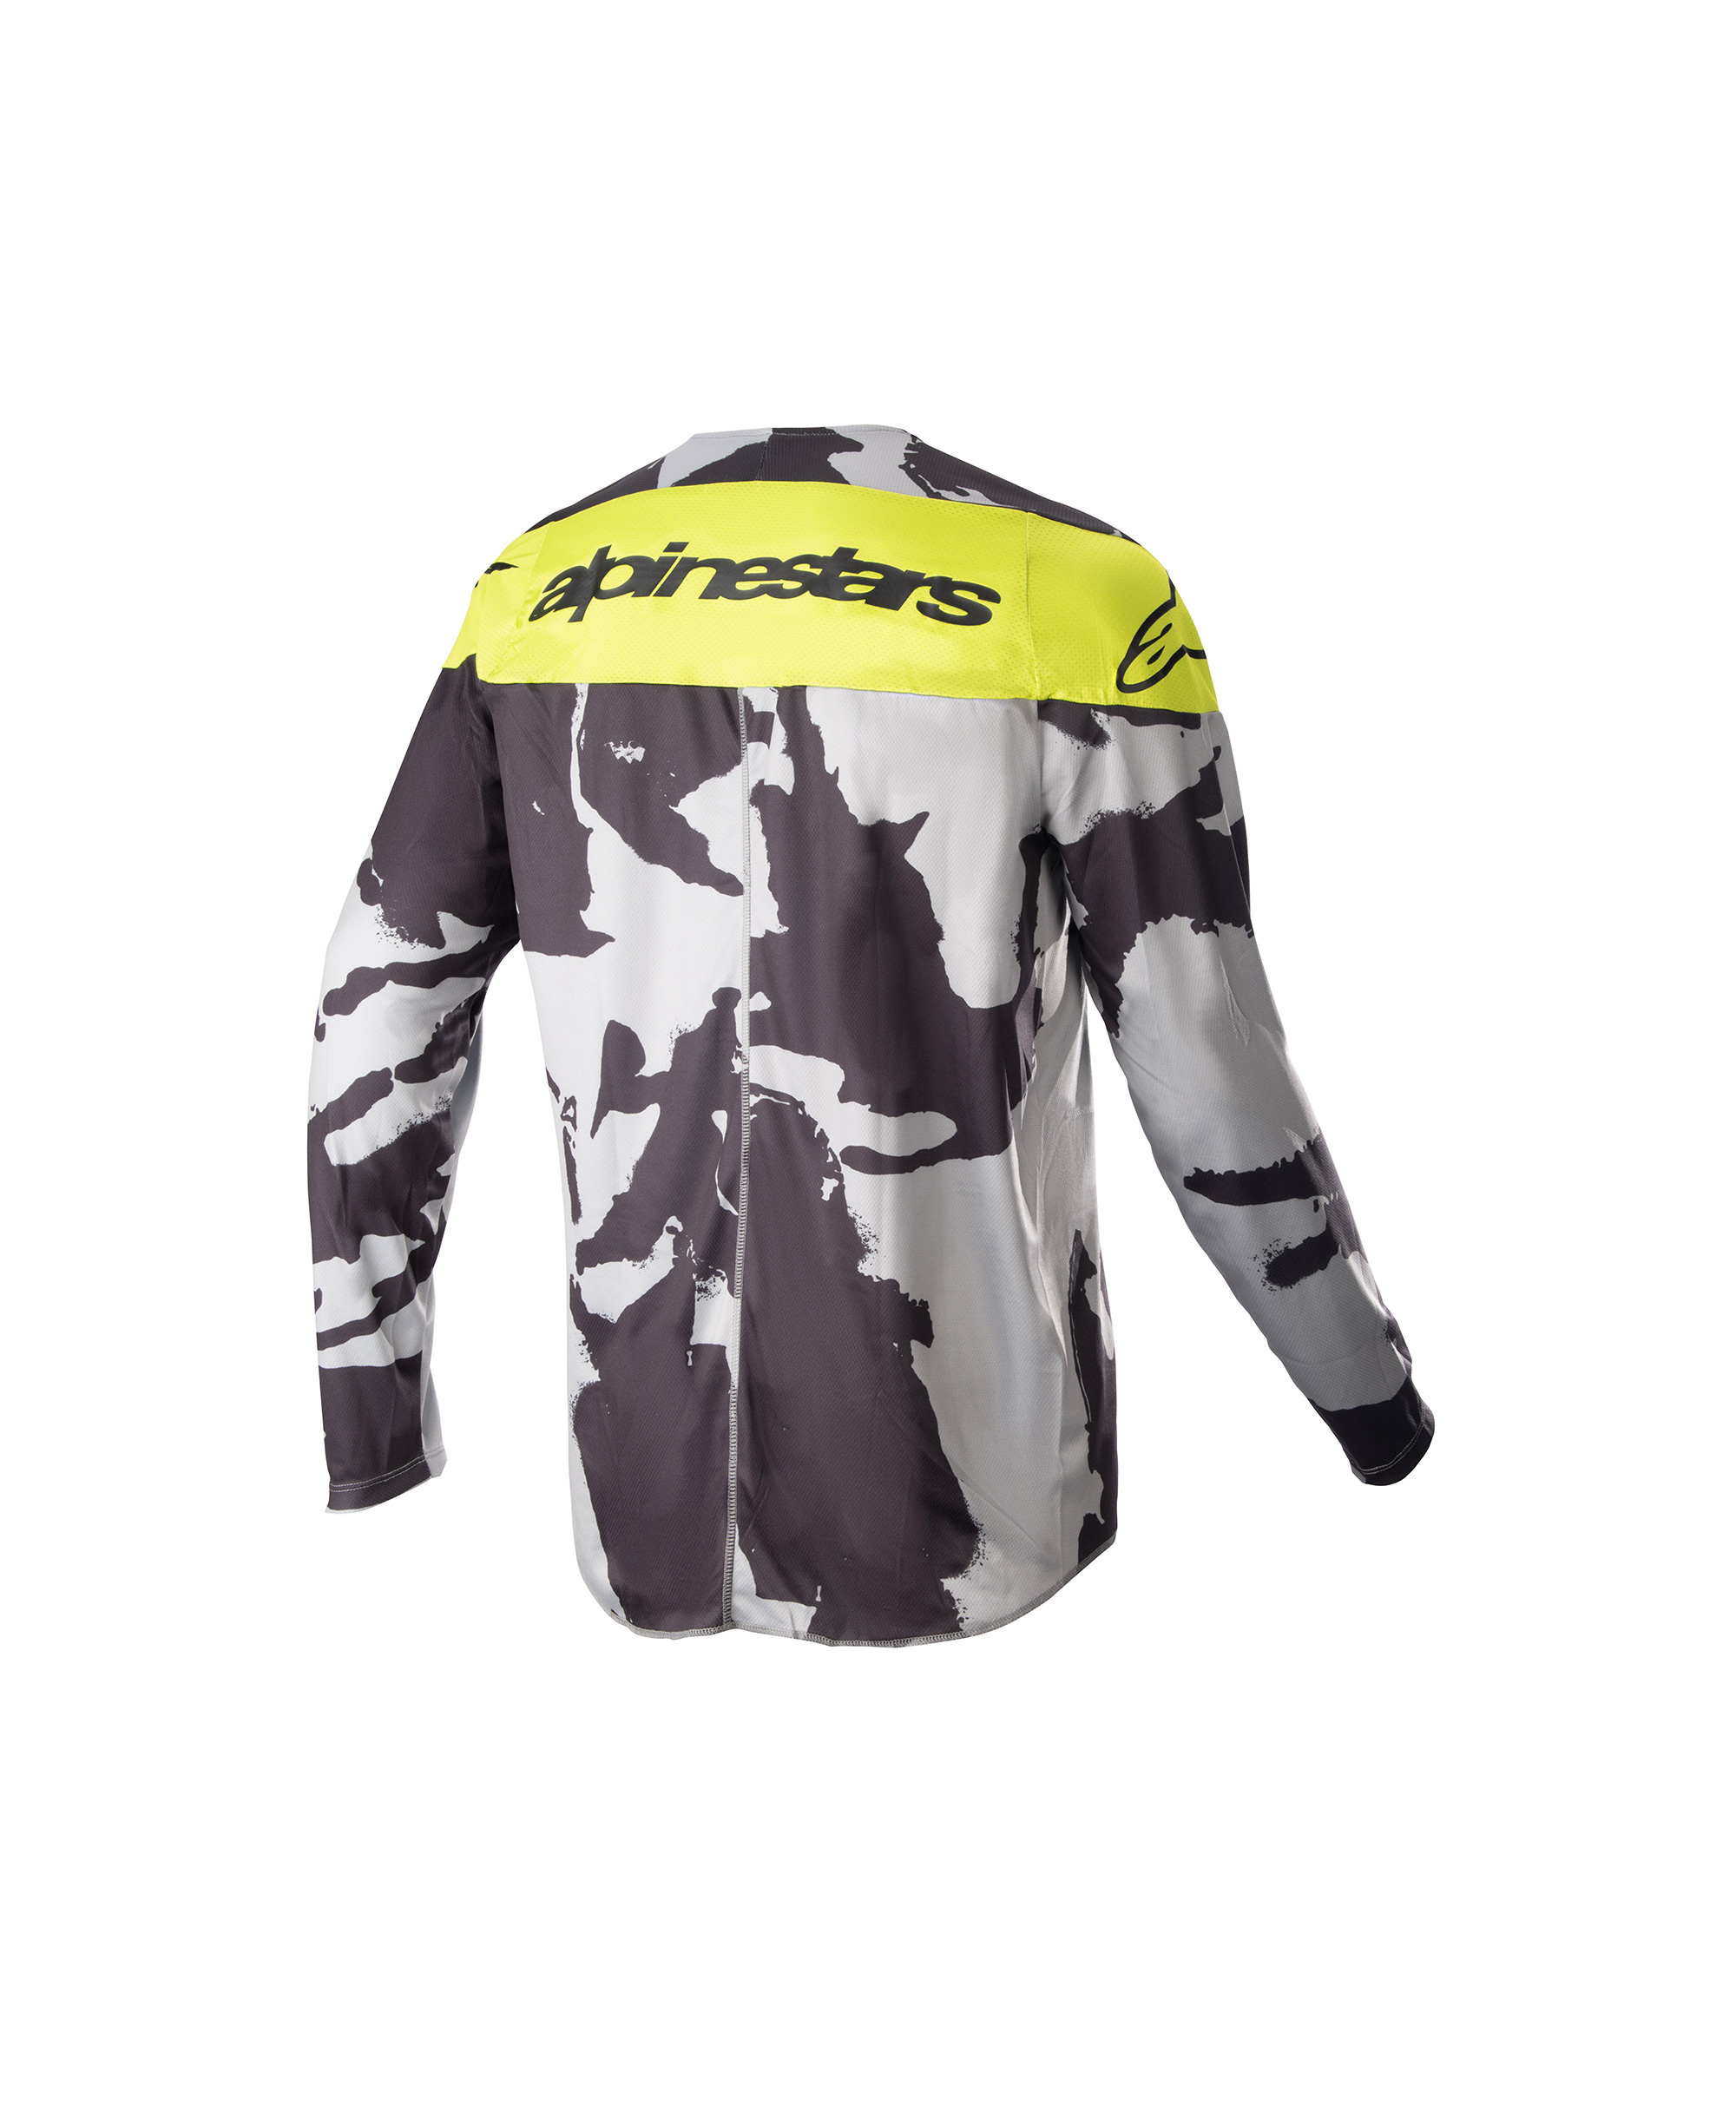 YOUTH RACER TACTICAL JERSEY CAST GRAY CAMO YELLOW FLUO